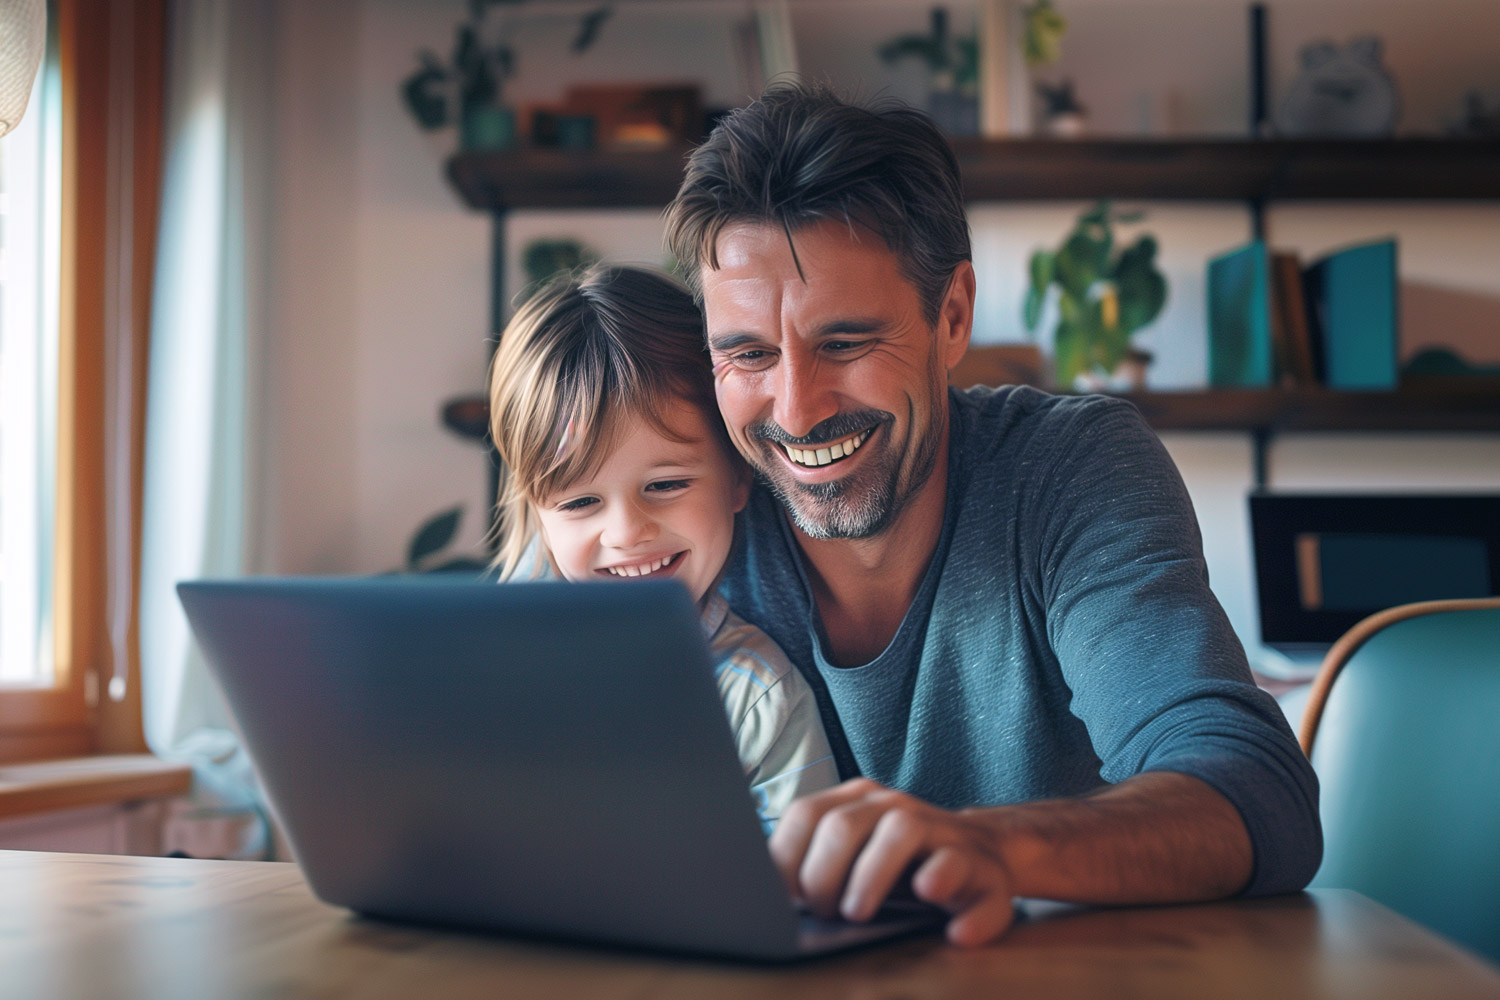 photo of a dad and daughter using a laptop